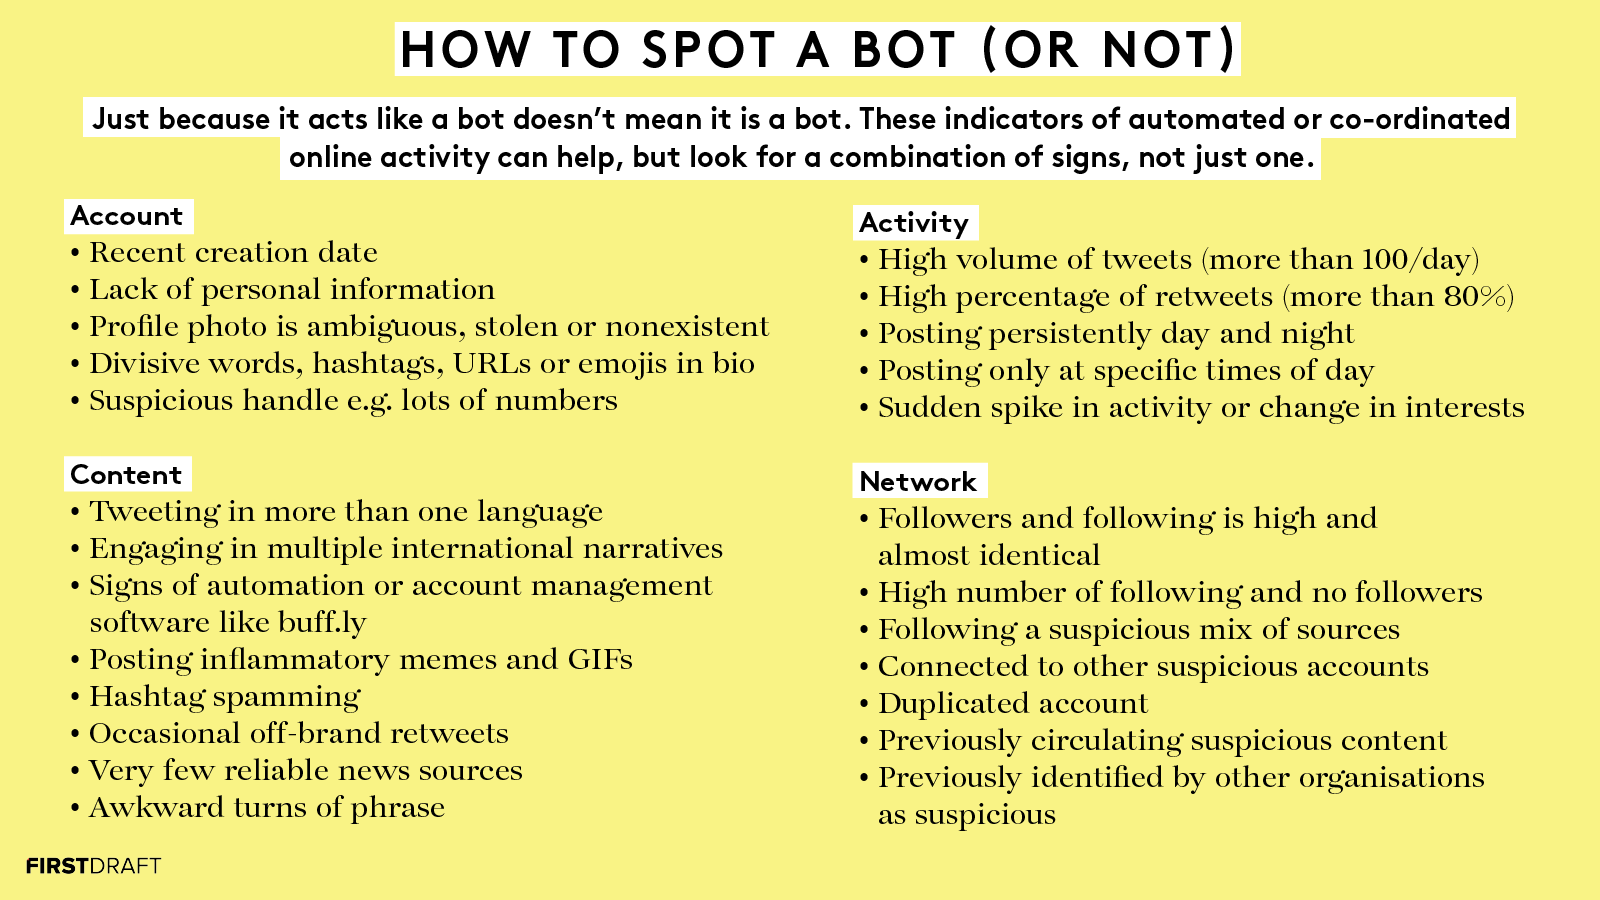 How To Spot A Bot Or Not The Main Indicators Of Online Automation Co Ordination And Inauthentic Activity